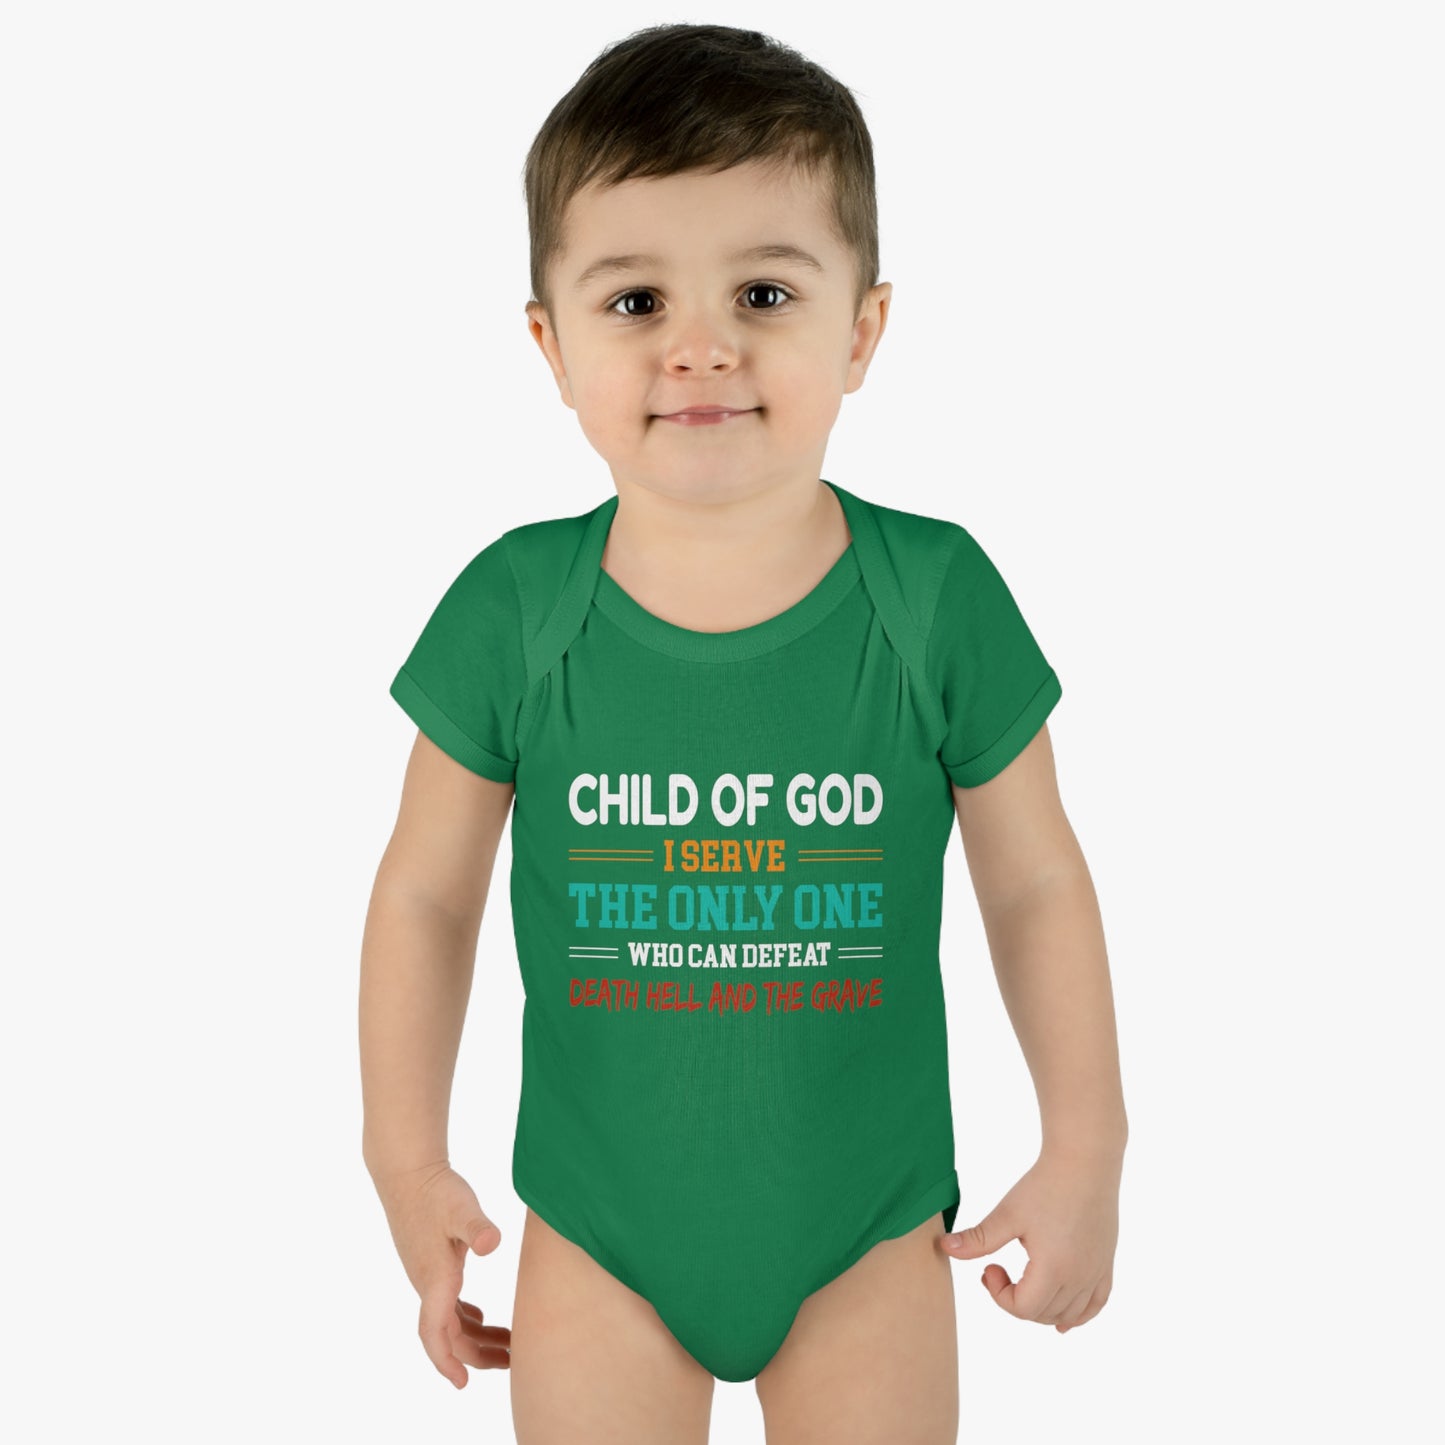 Child Of God I Serve The Only One Who Can Defeat Death Hell And The Grave Christian Baby Onesie Printify